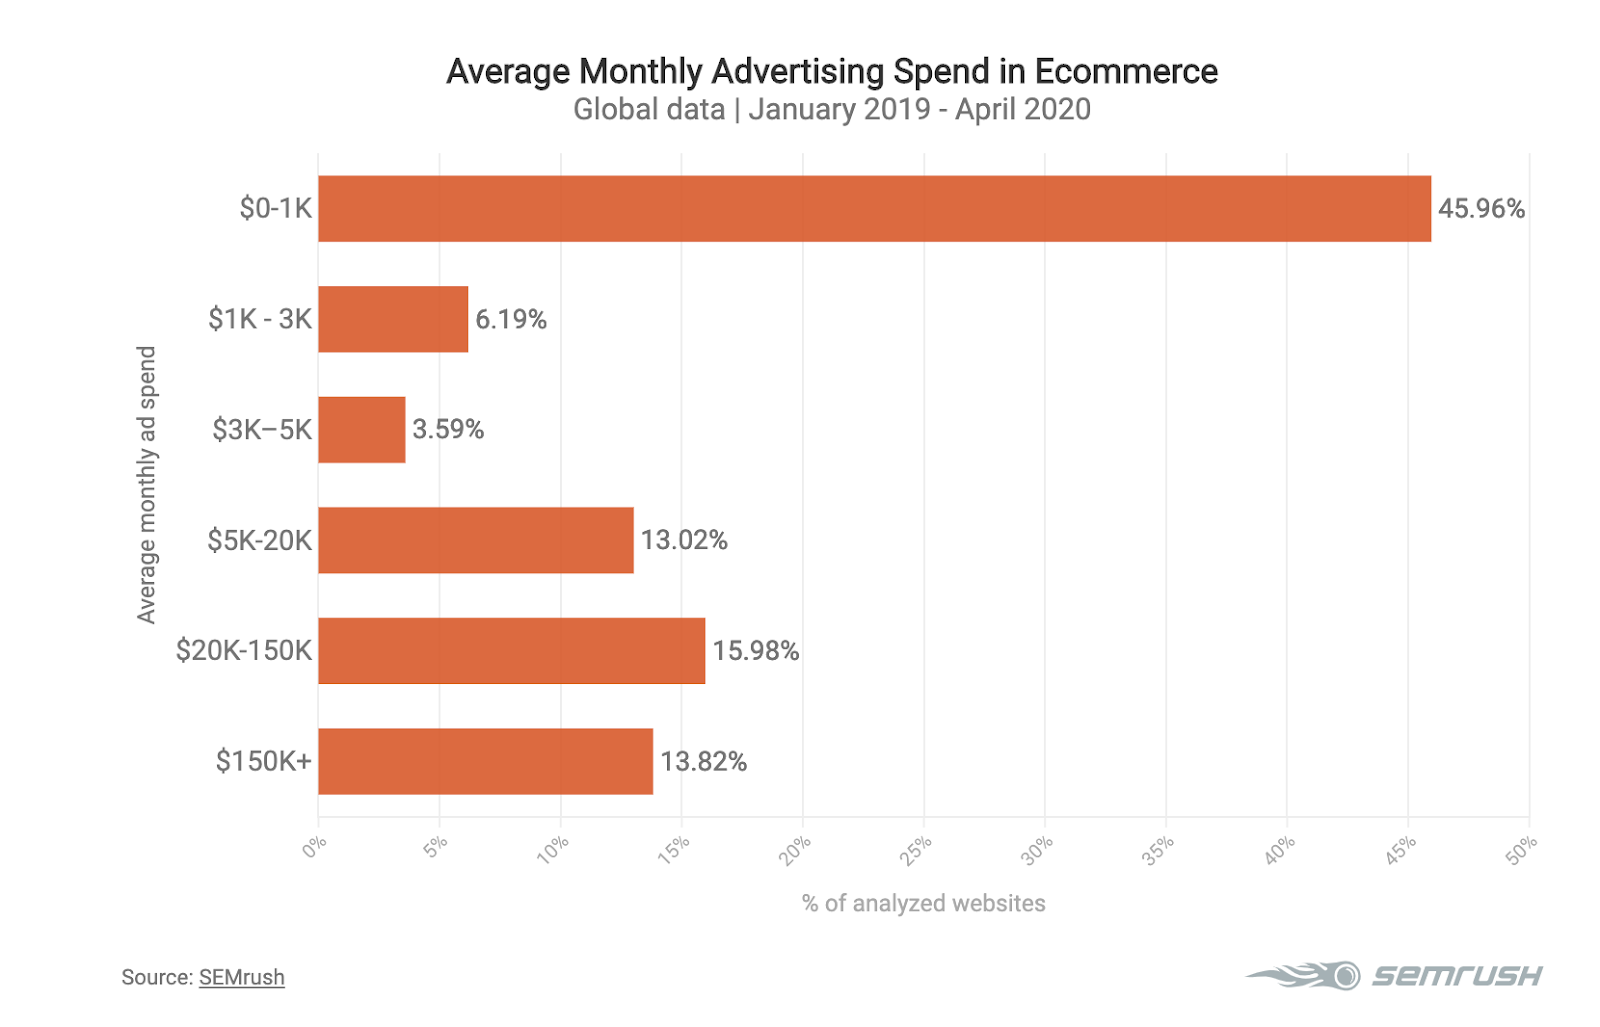 Average monthly spend on online ads in ecommerce